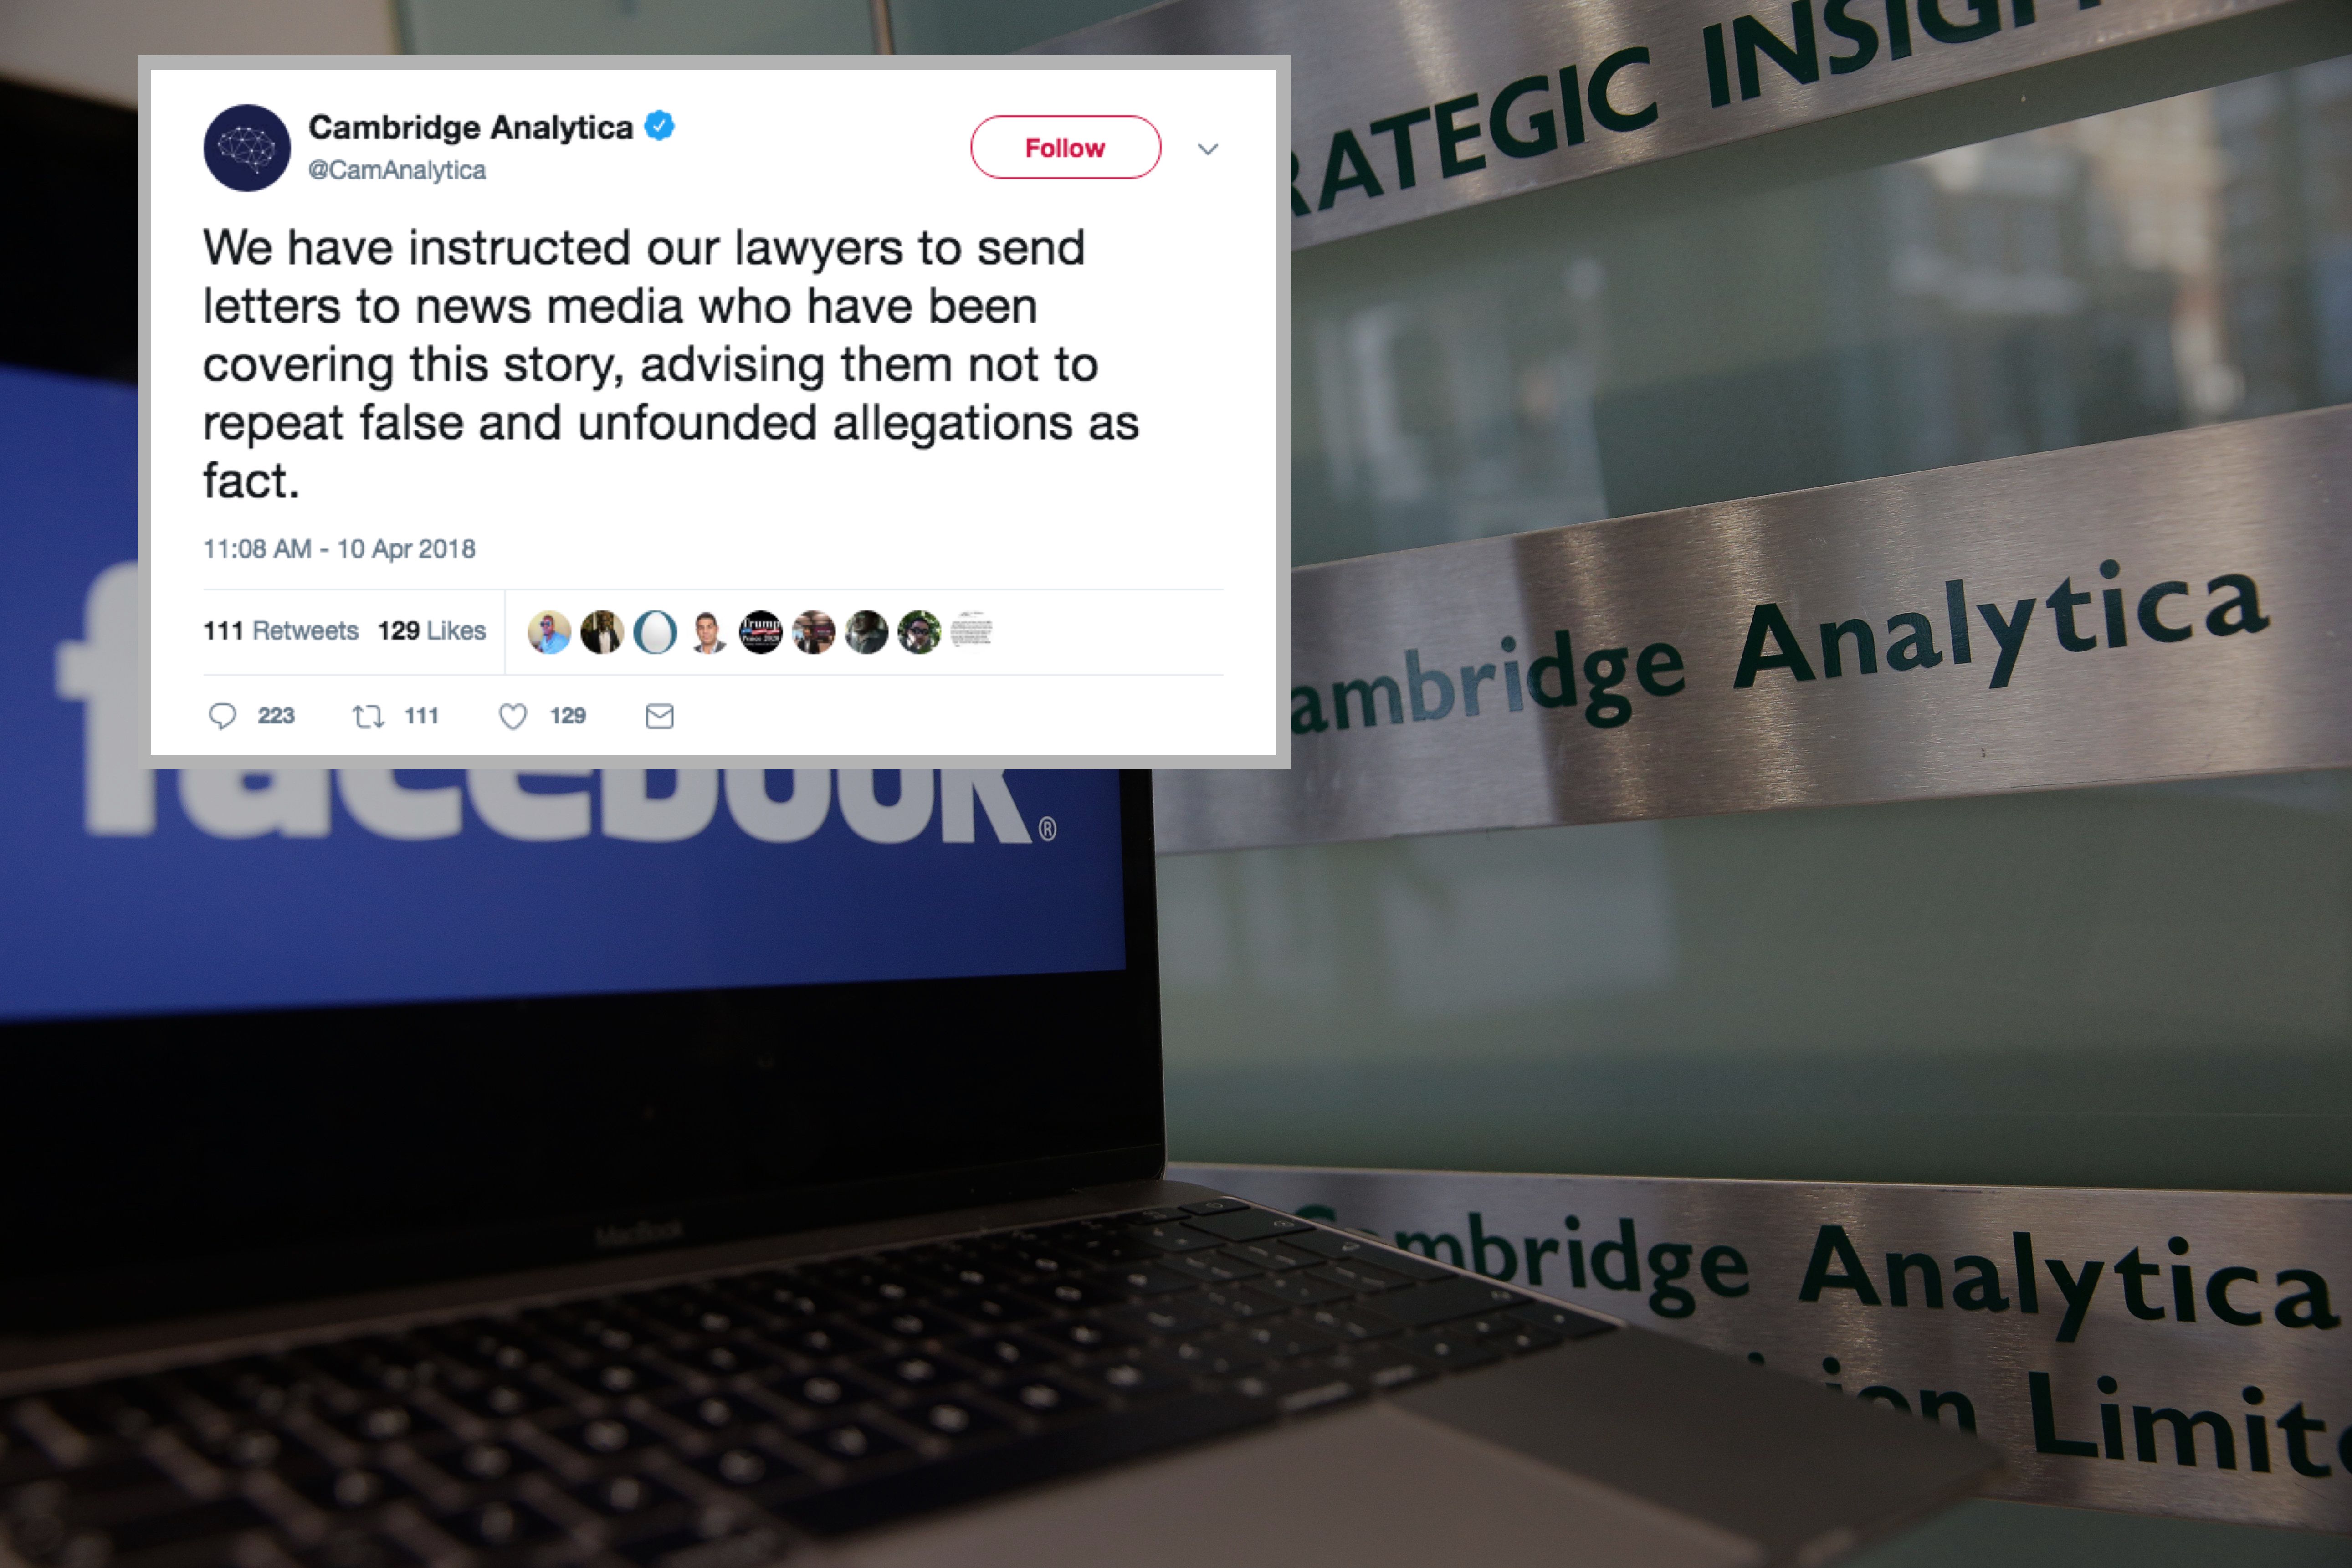 Cambridge Analytica threatens reporters for reporting on their bad behavior.